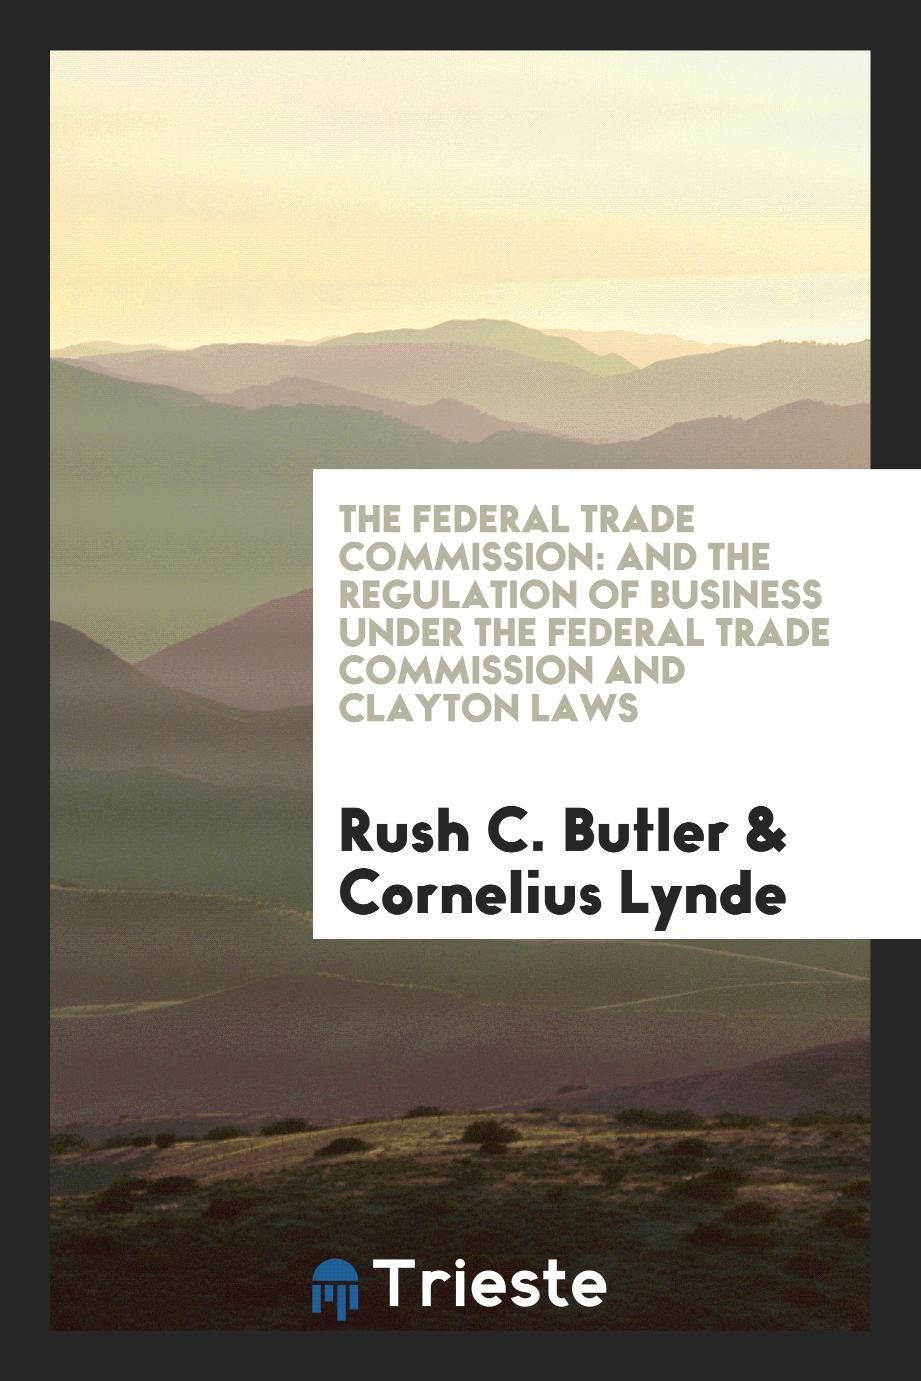 The Federal Trade Commission: And the Regulation of Business Under the Federal Trade Commission and Clayton Laws